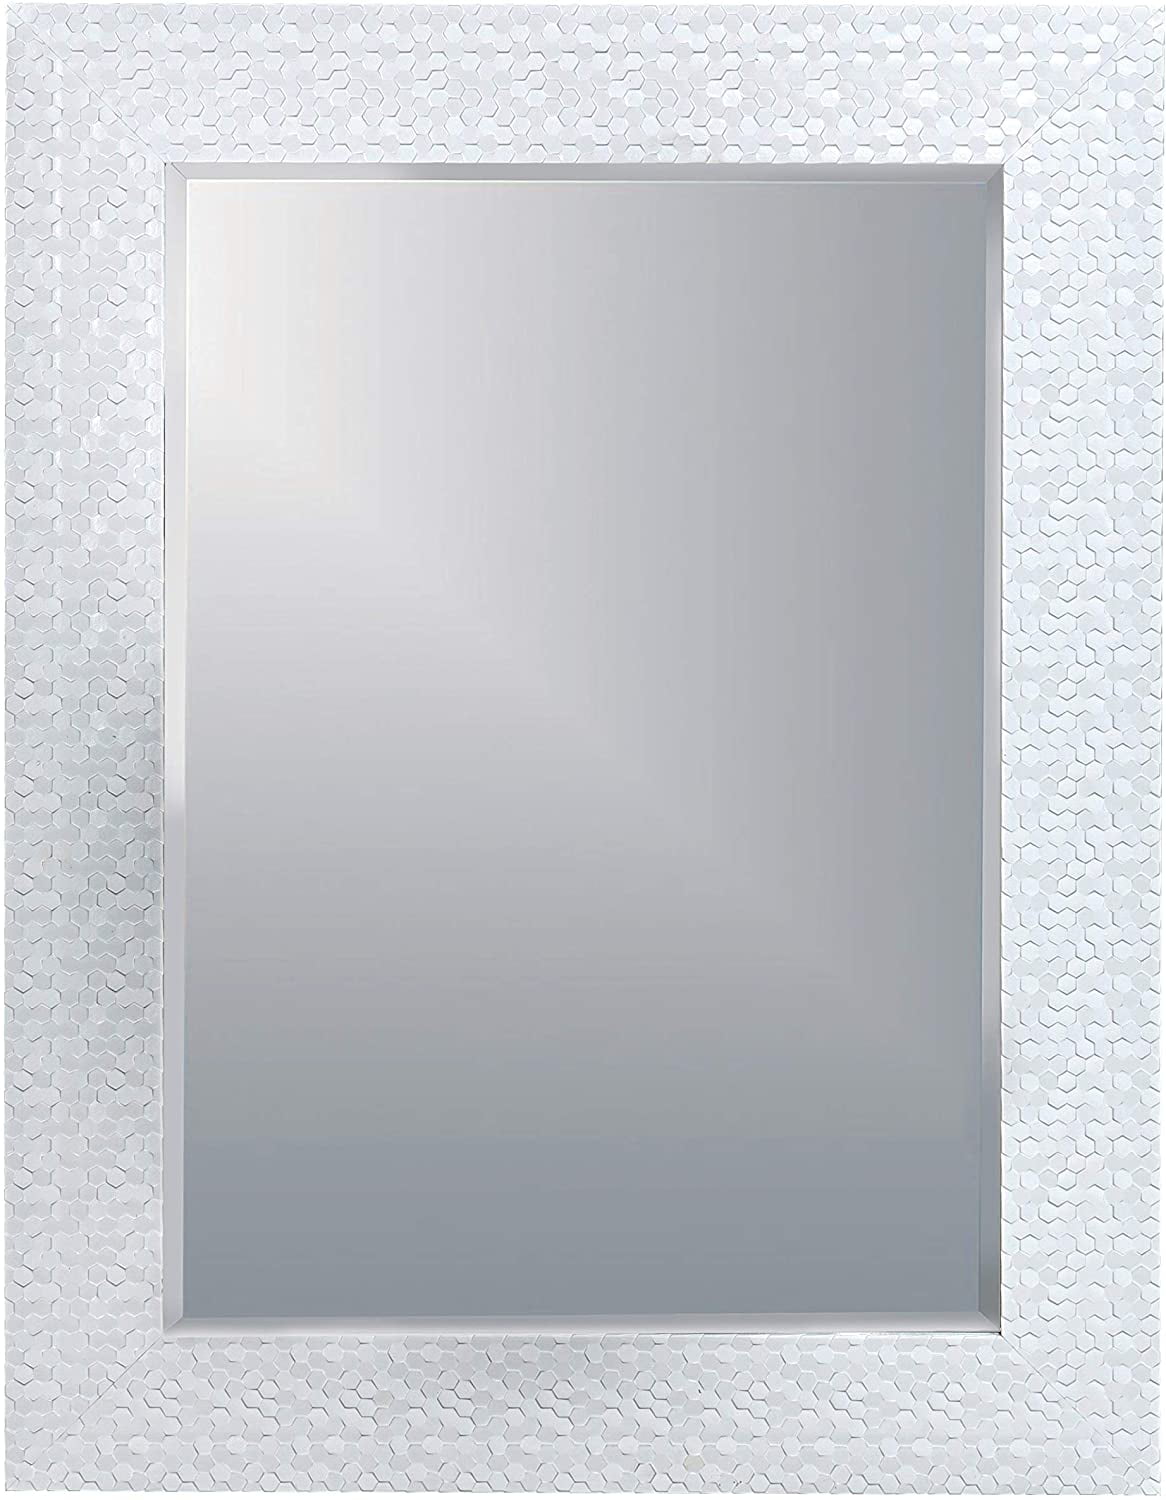 Champagne Marabell Rectangle Mosaic Framed Beveled Wall Mirror 21x27 inches